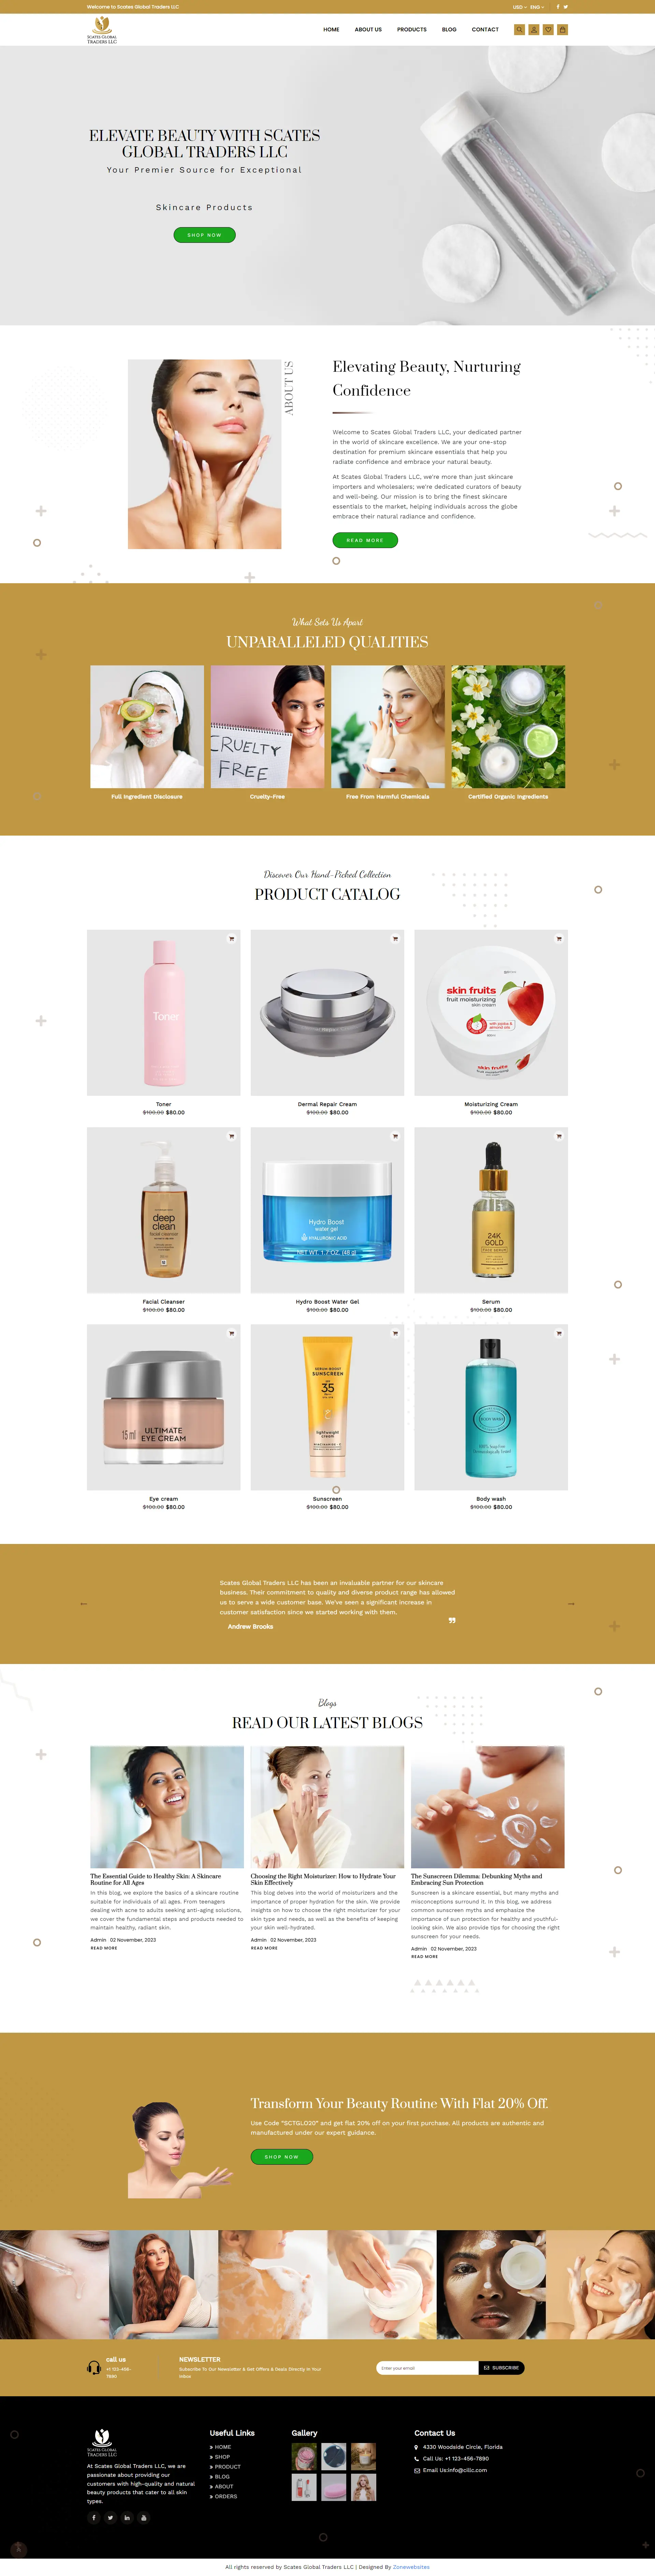 Scates - Ecommerce Store For Beauty & Skincare Products